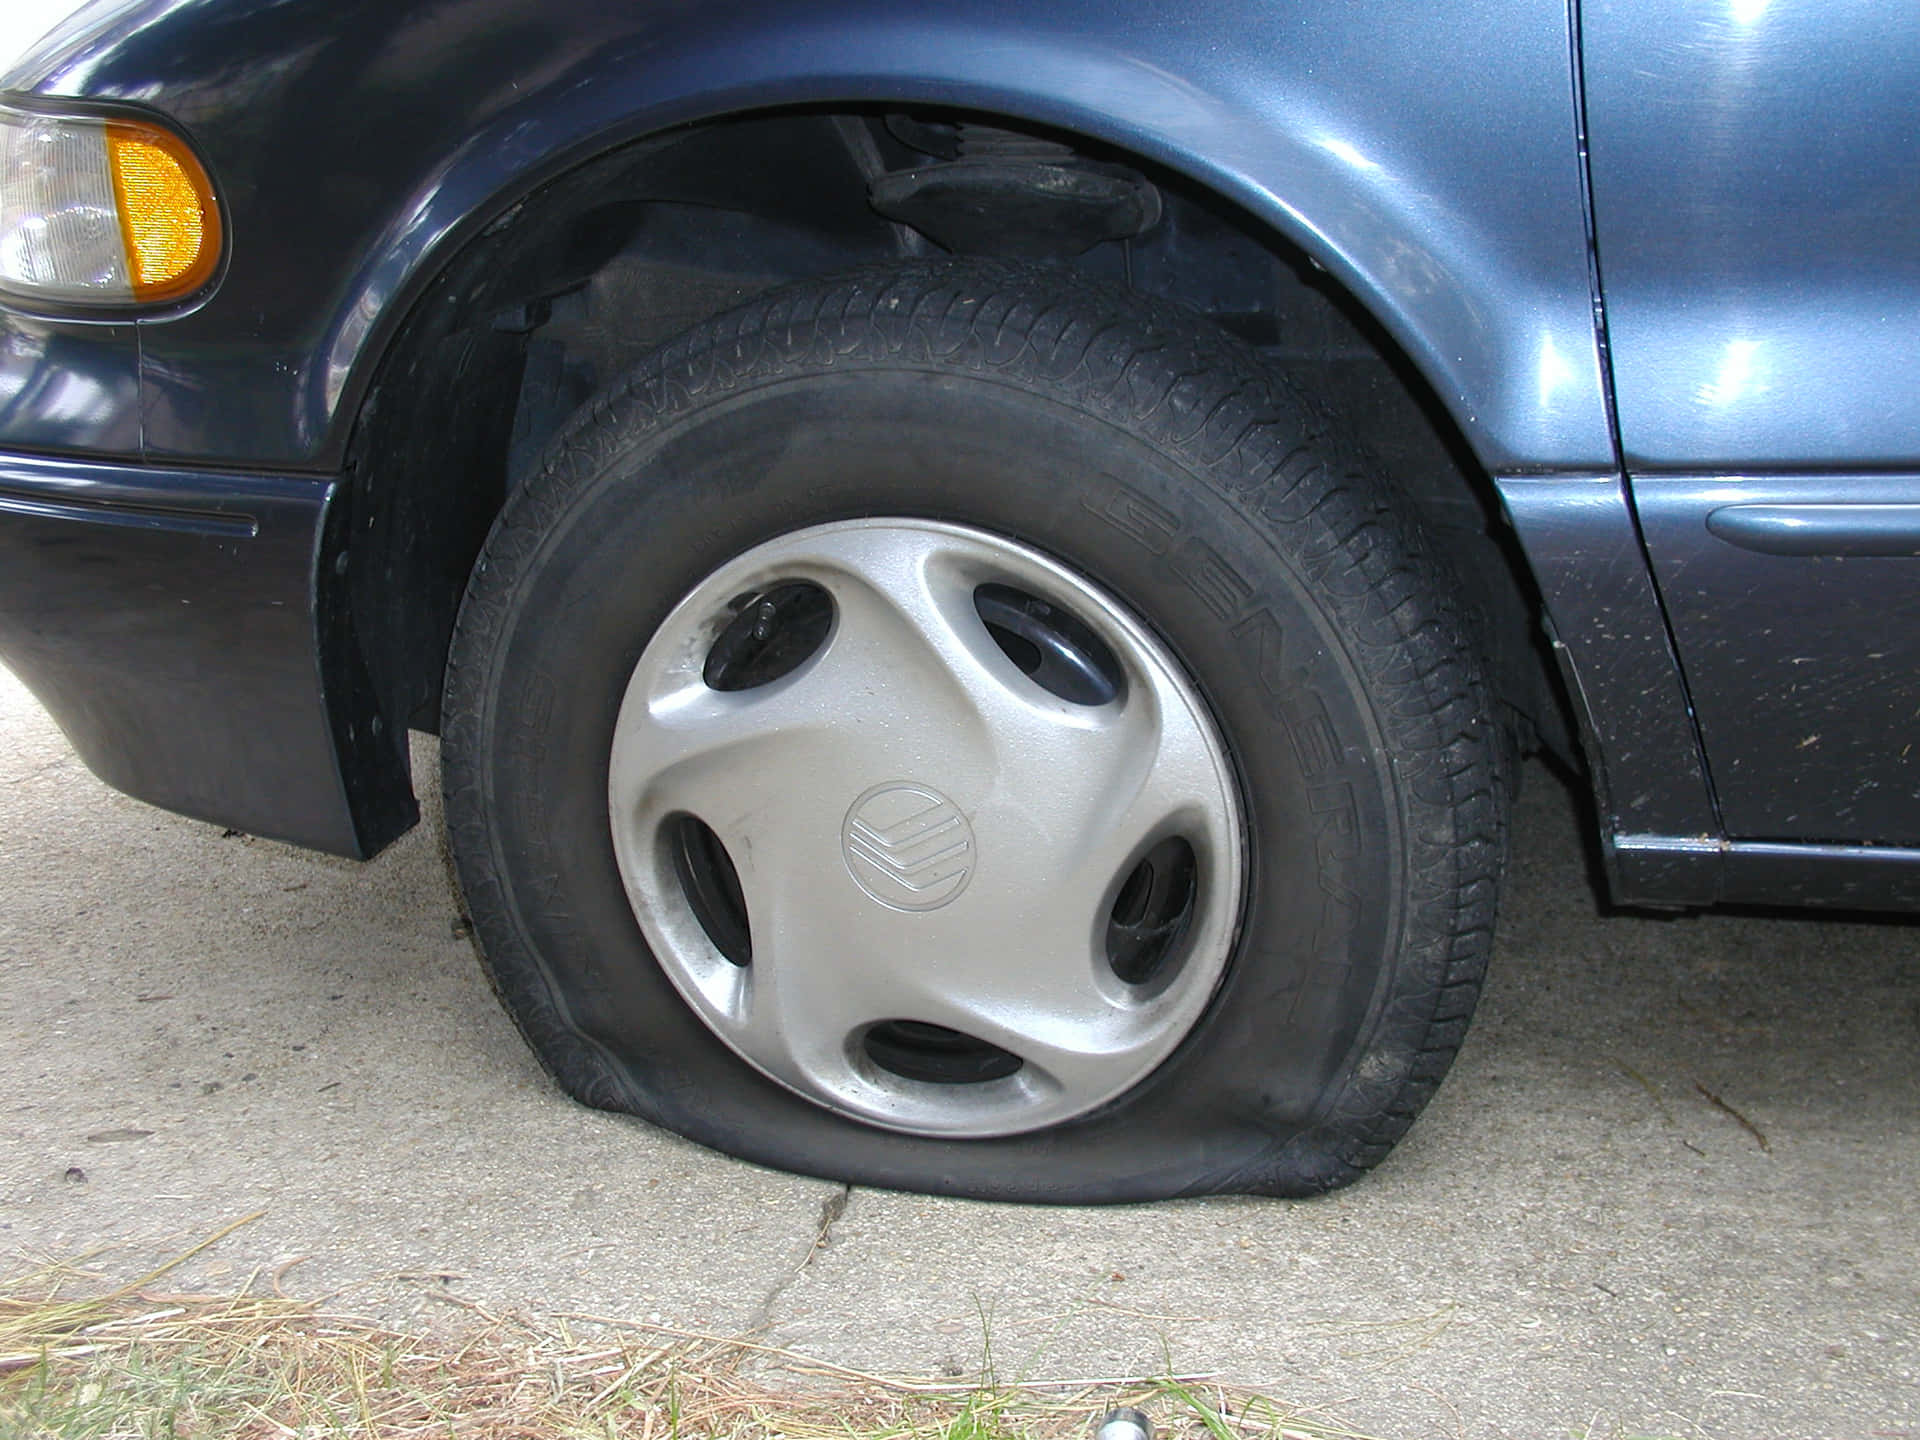 Getting a flat tire can ruin your day